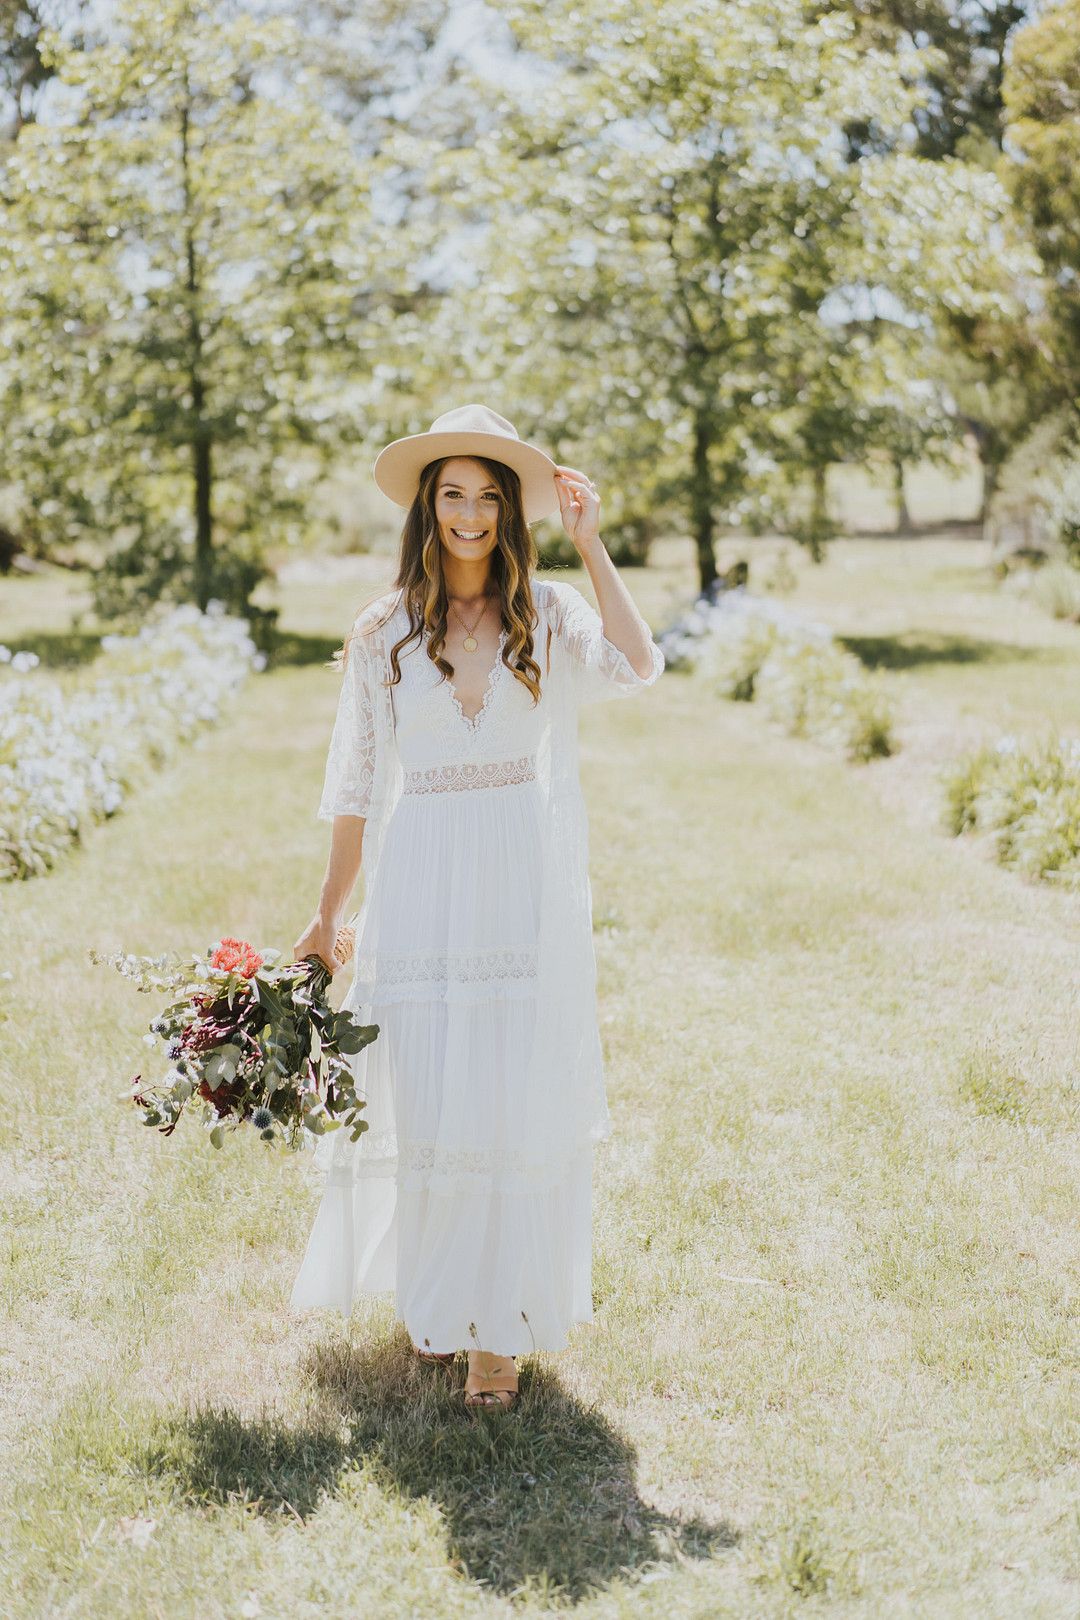 bride in white dress and hat in outdoor rustic wedding